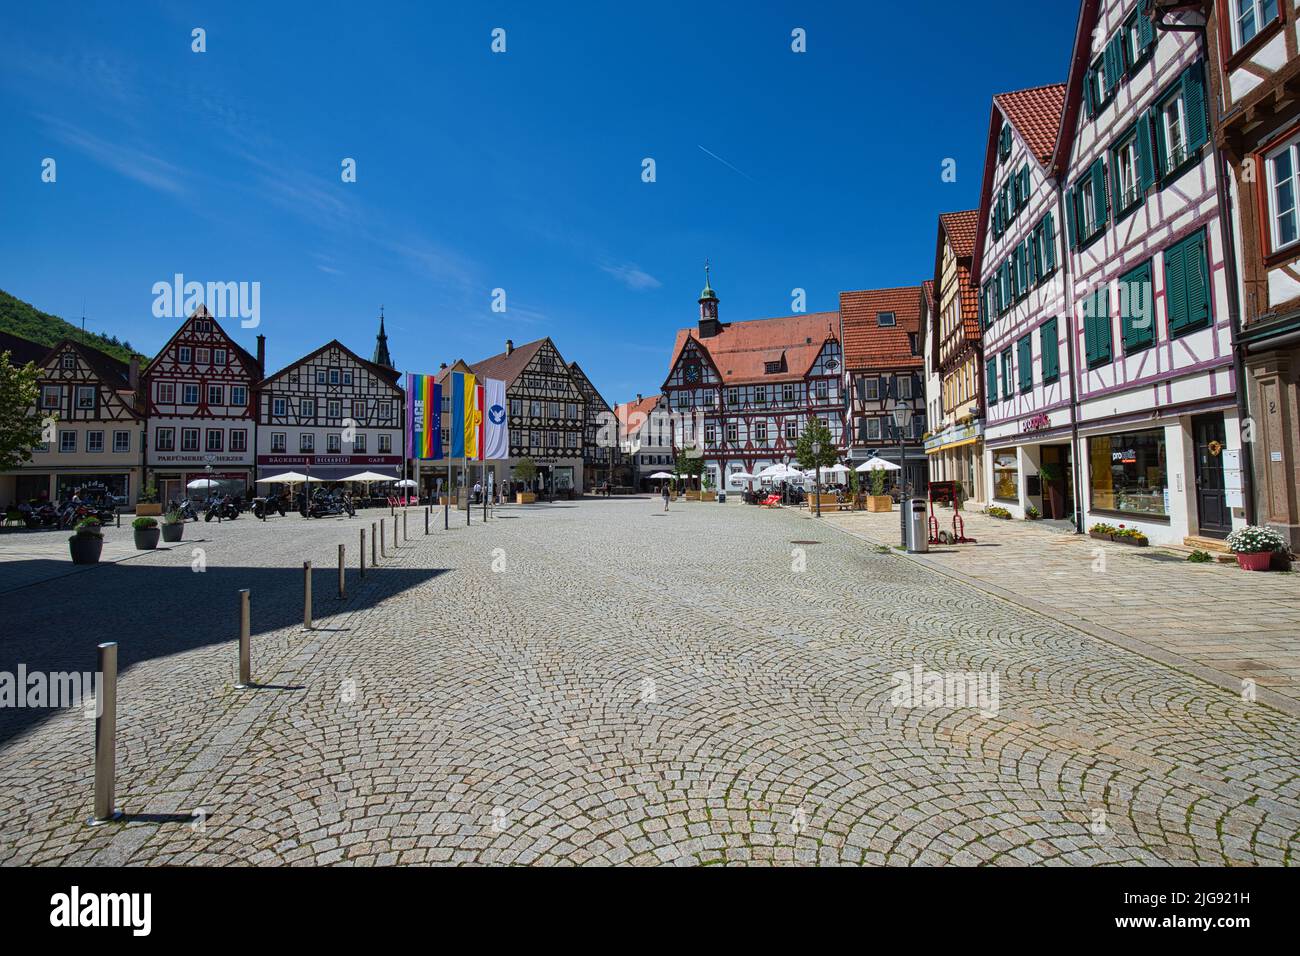 Bad Urach, Baden-Württemberg, Germany - May 15, 2022: The market place of Bad Urach on a sunny day. Stock Photo